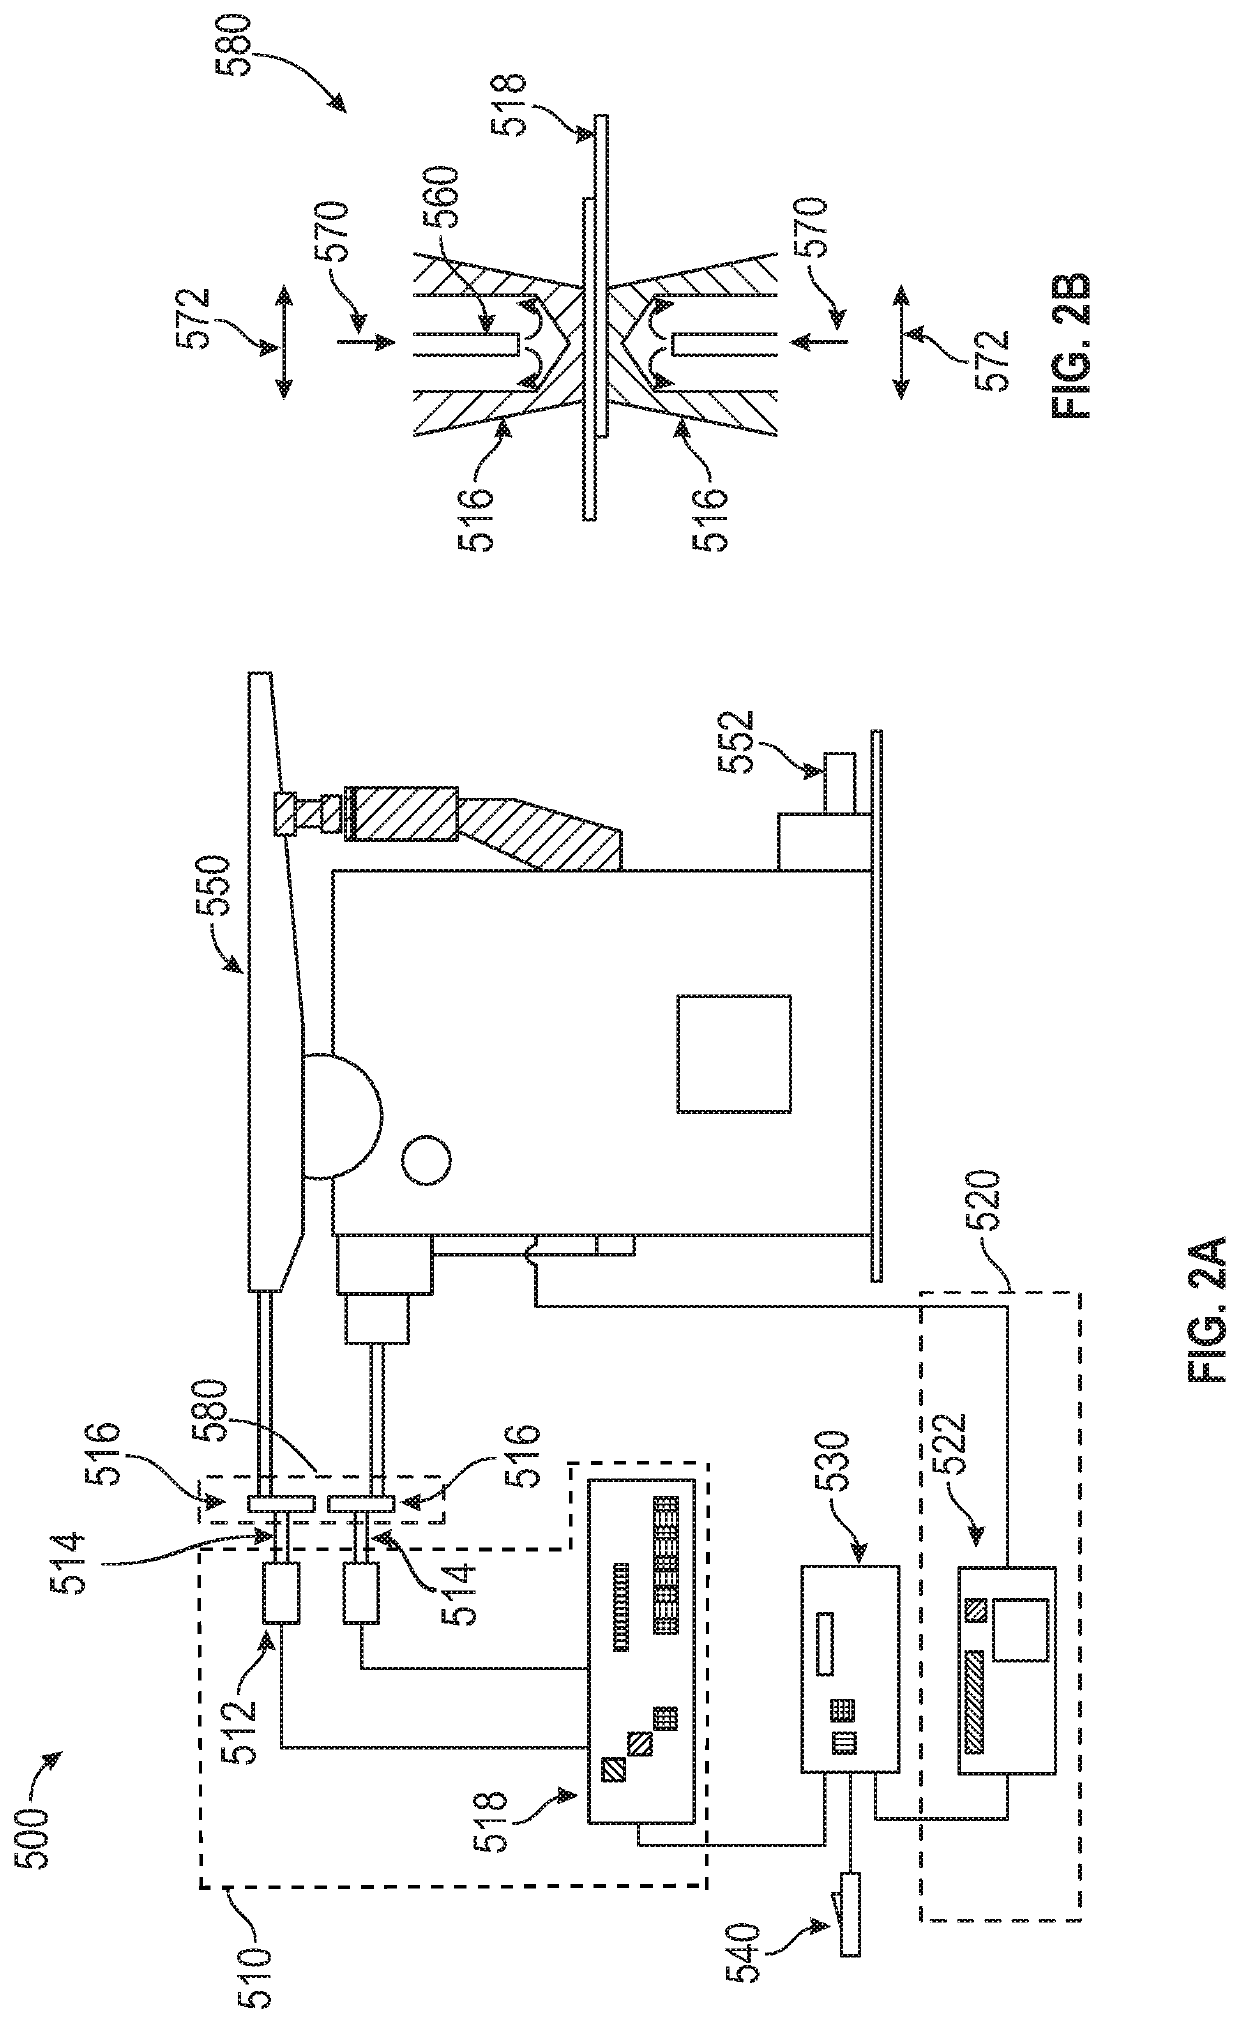 Systems and methods for integrated welding of metal materials